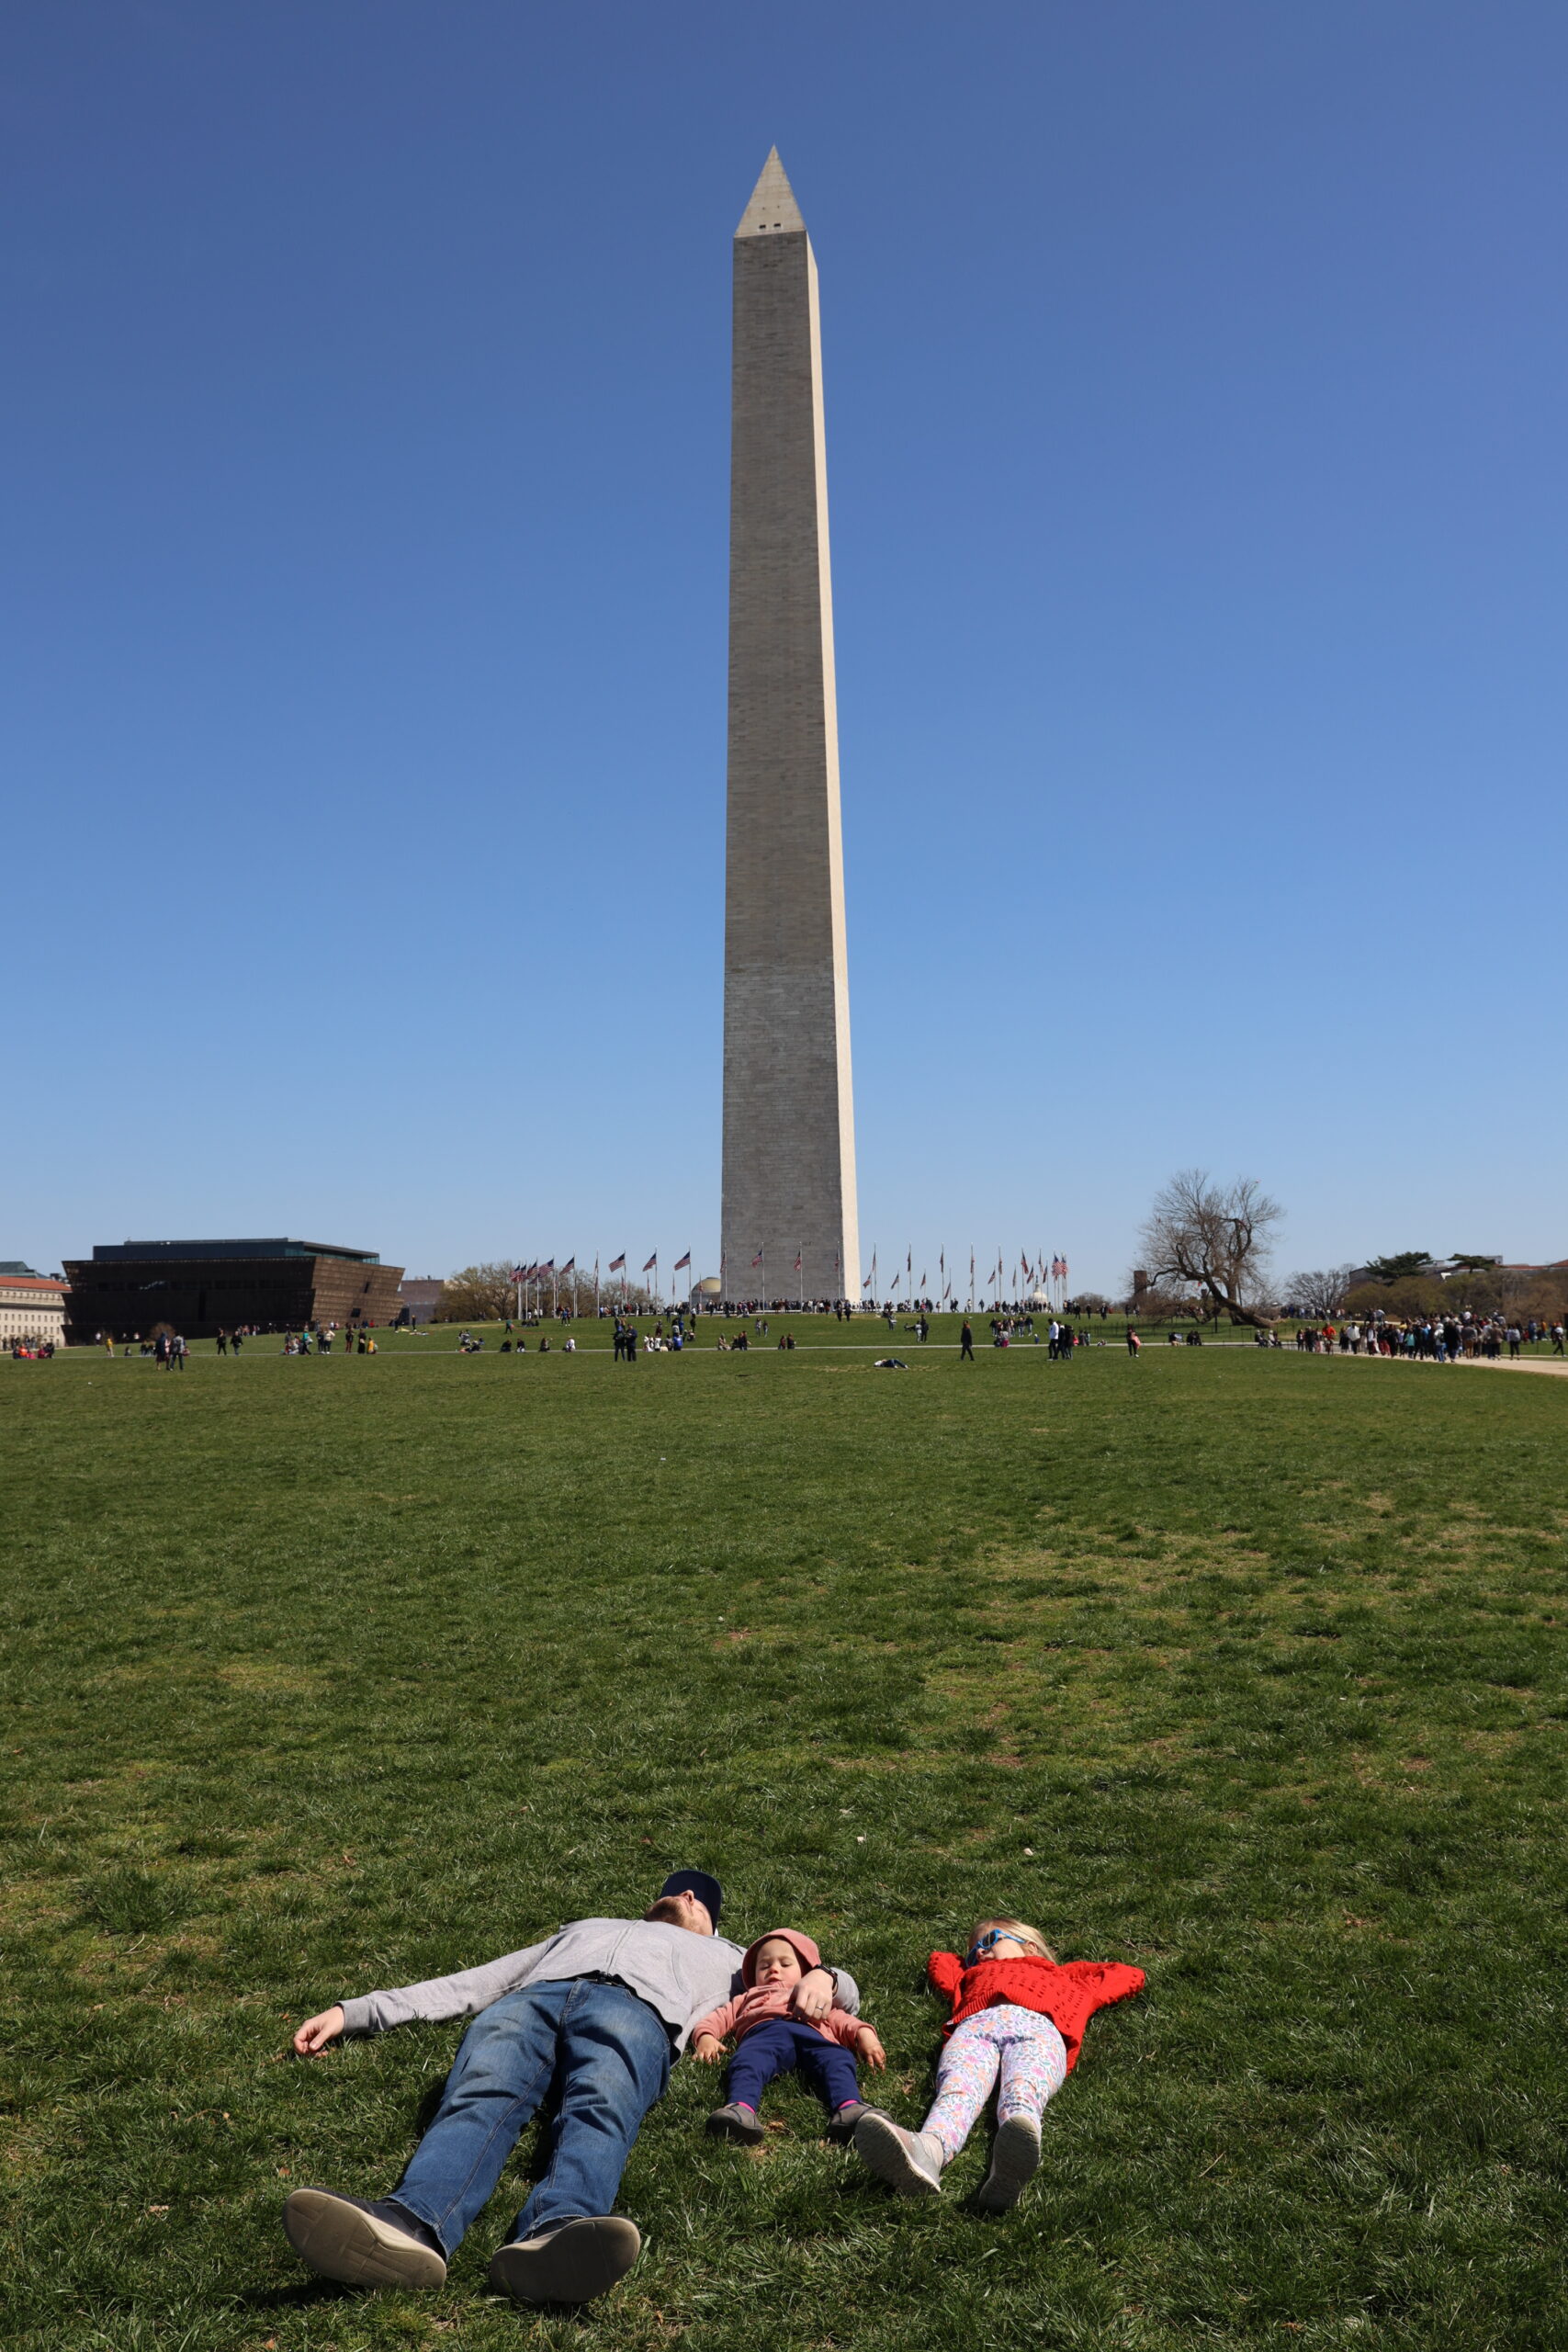 A lawn in front of the Washington Monument